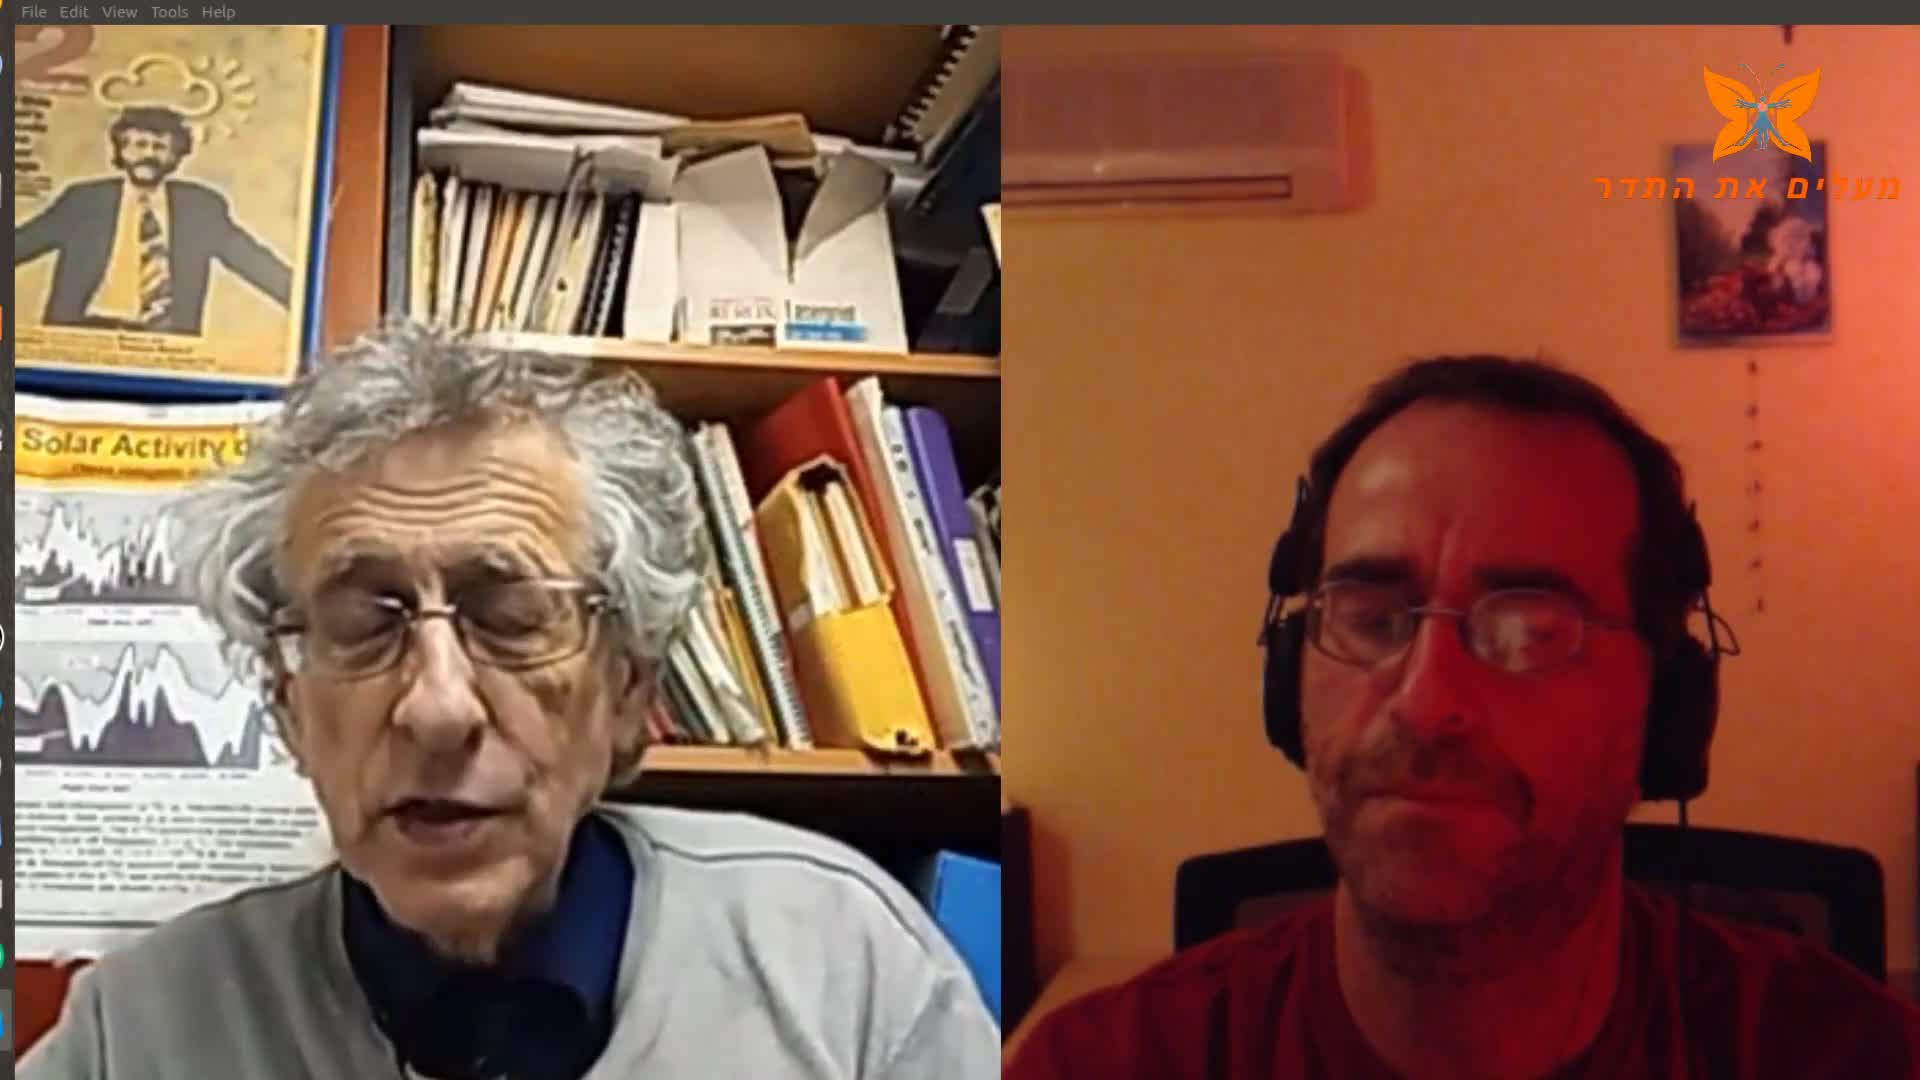 Piers corbyn on the coming mini ice age and the fake climate change